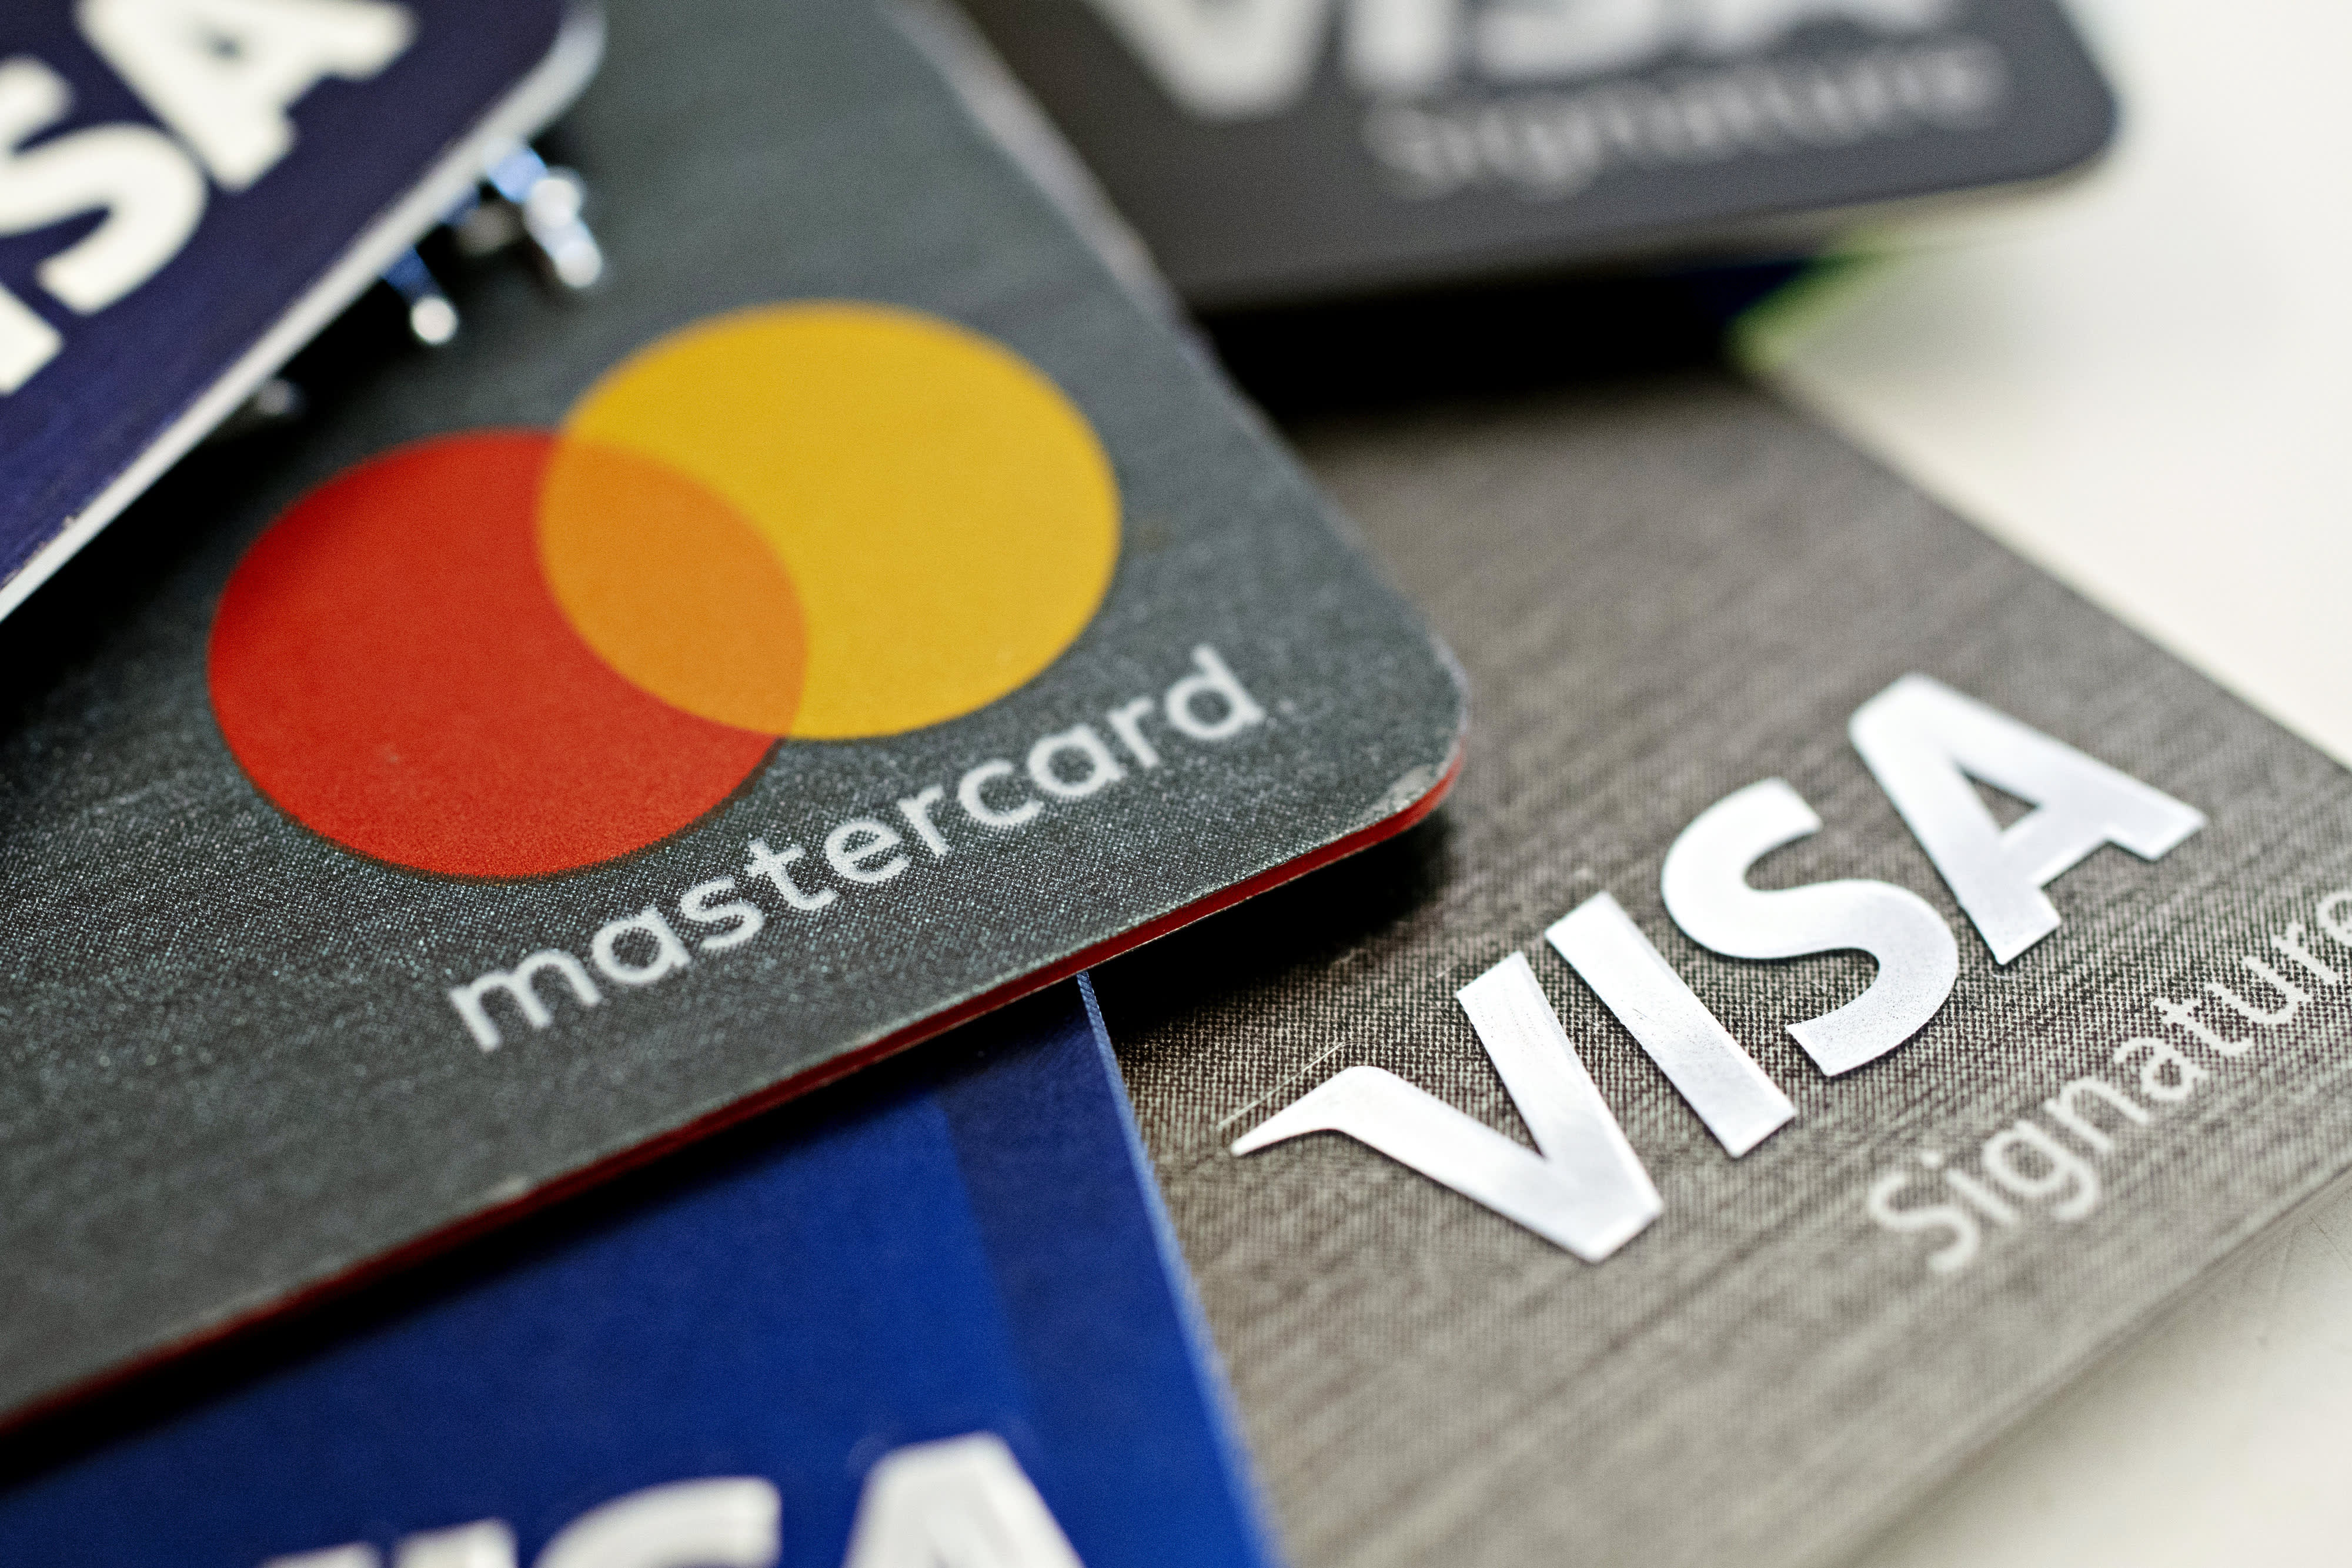 Credit card fee fight pits payment companies against retailers